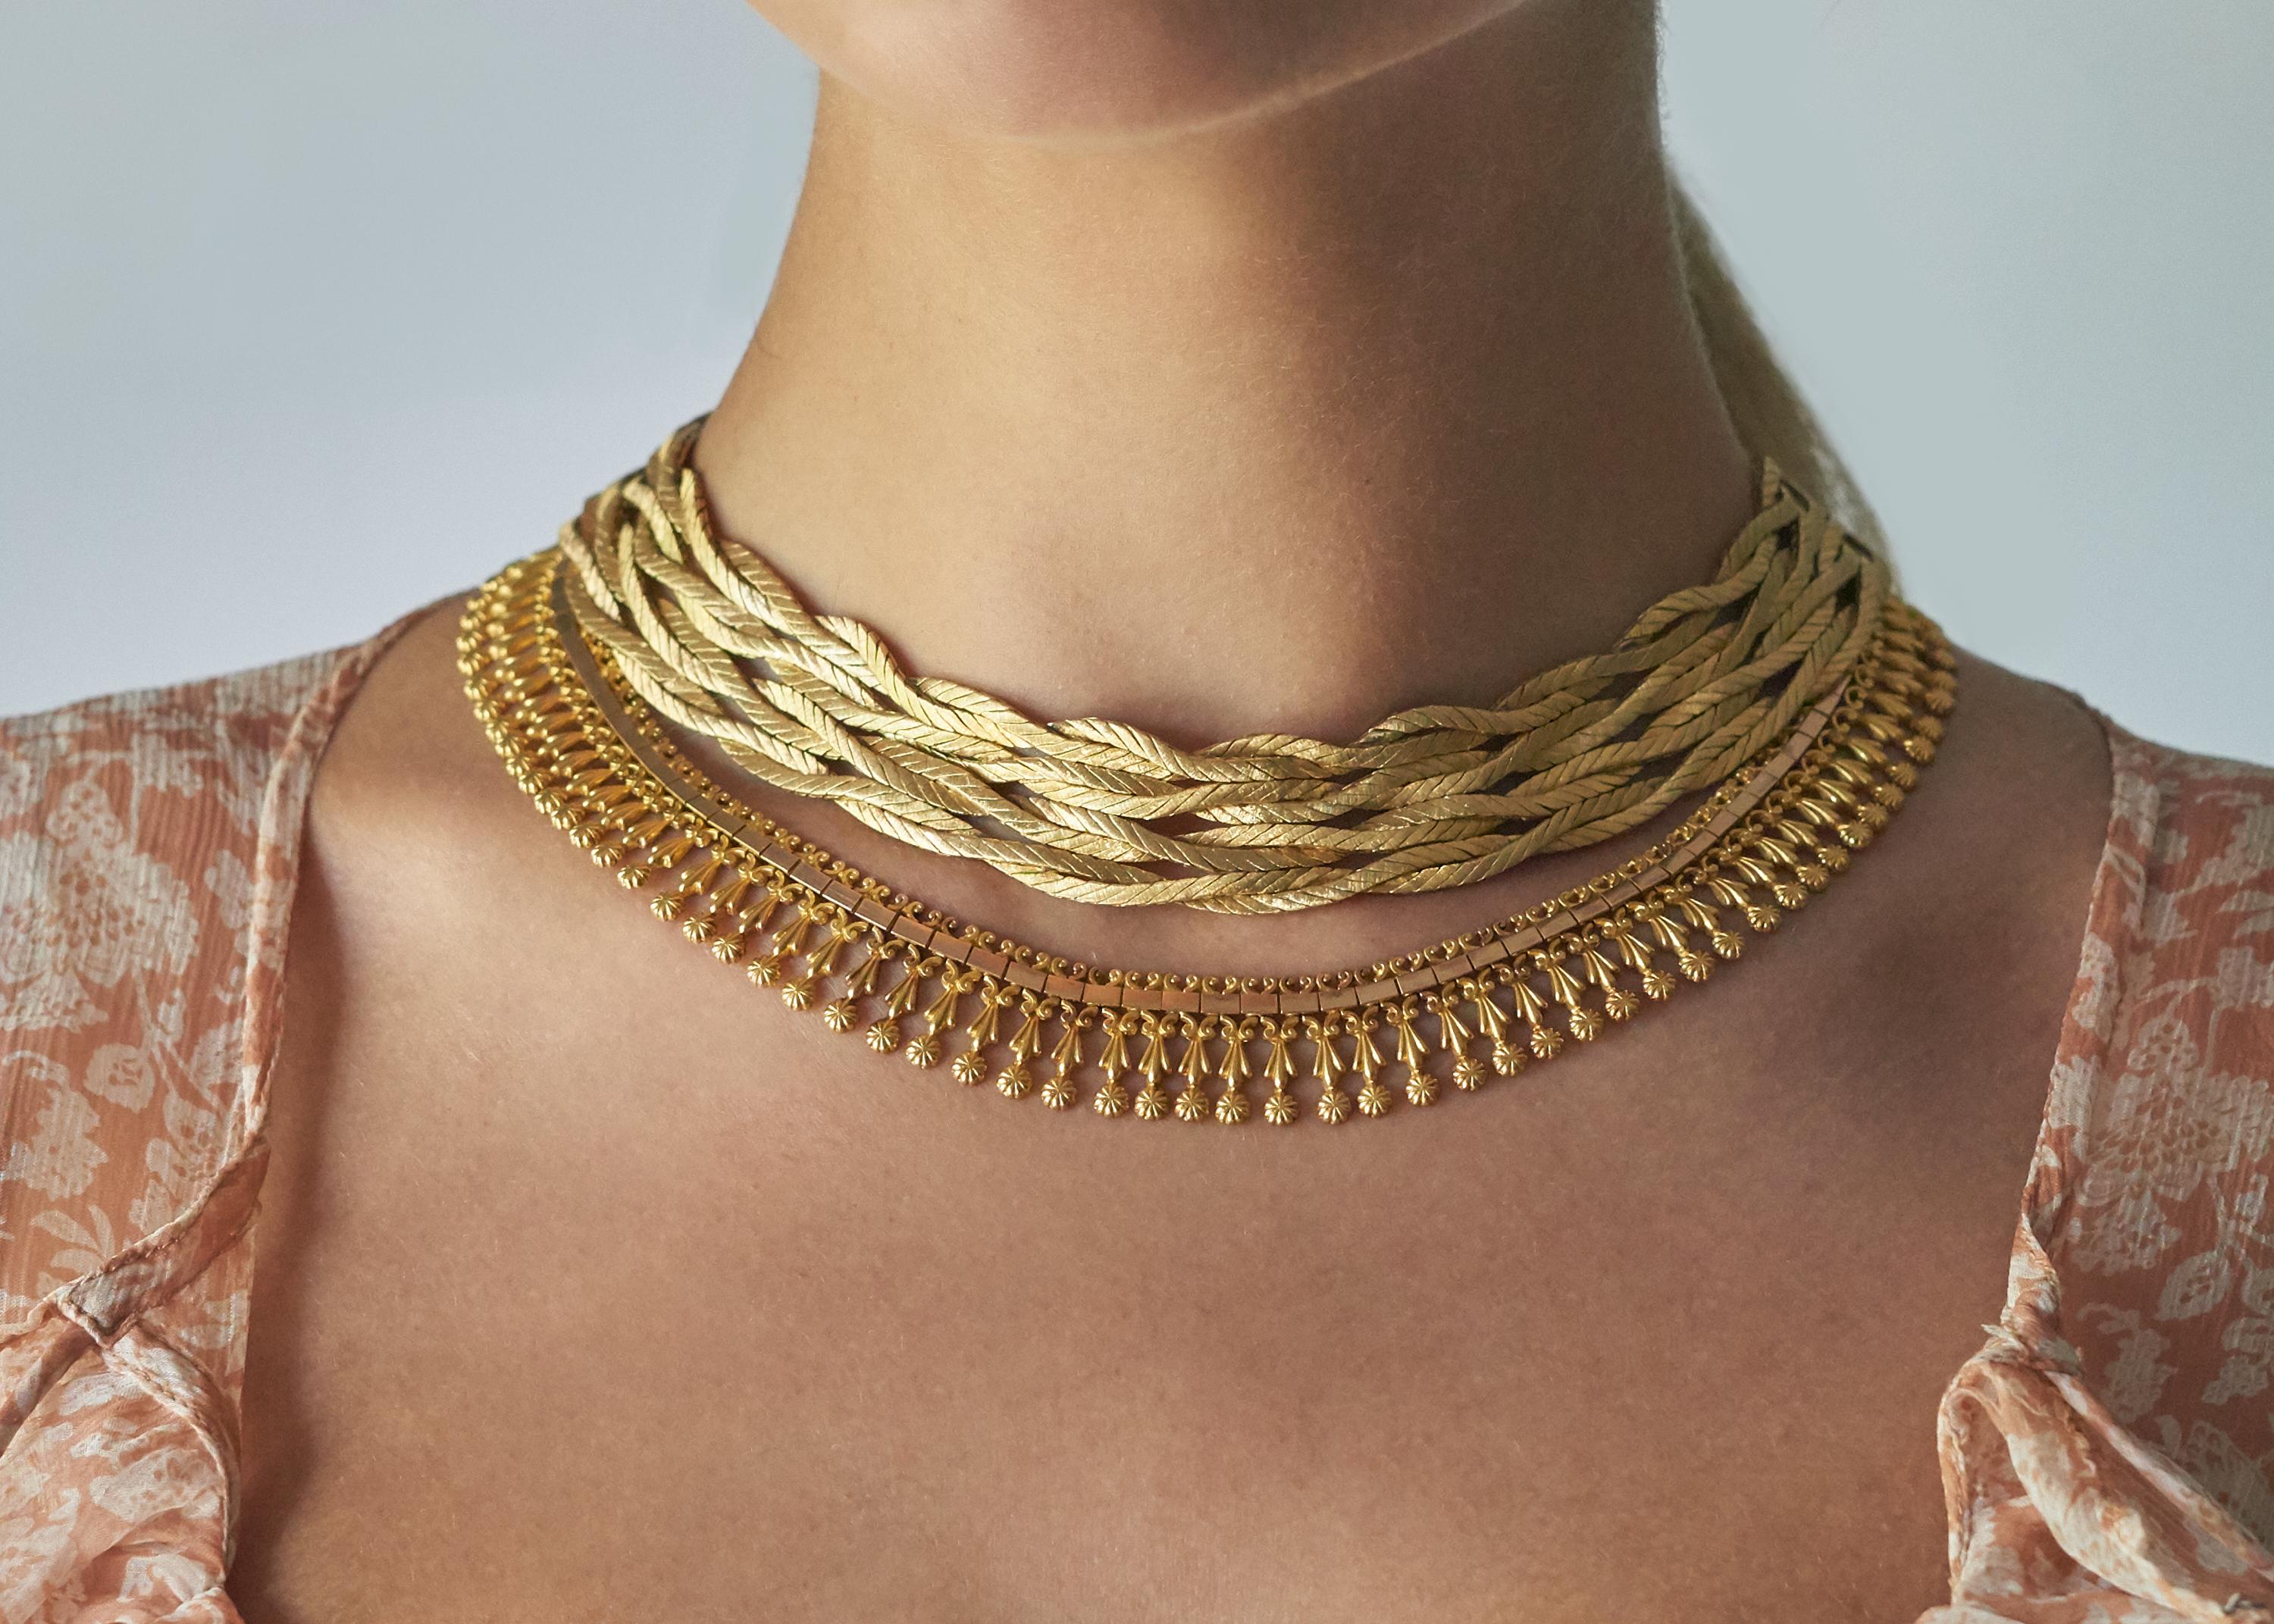 Women's French Yellow and Rose Gold Fringe Necklace, circa 1870